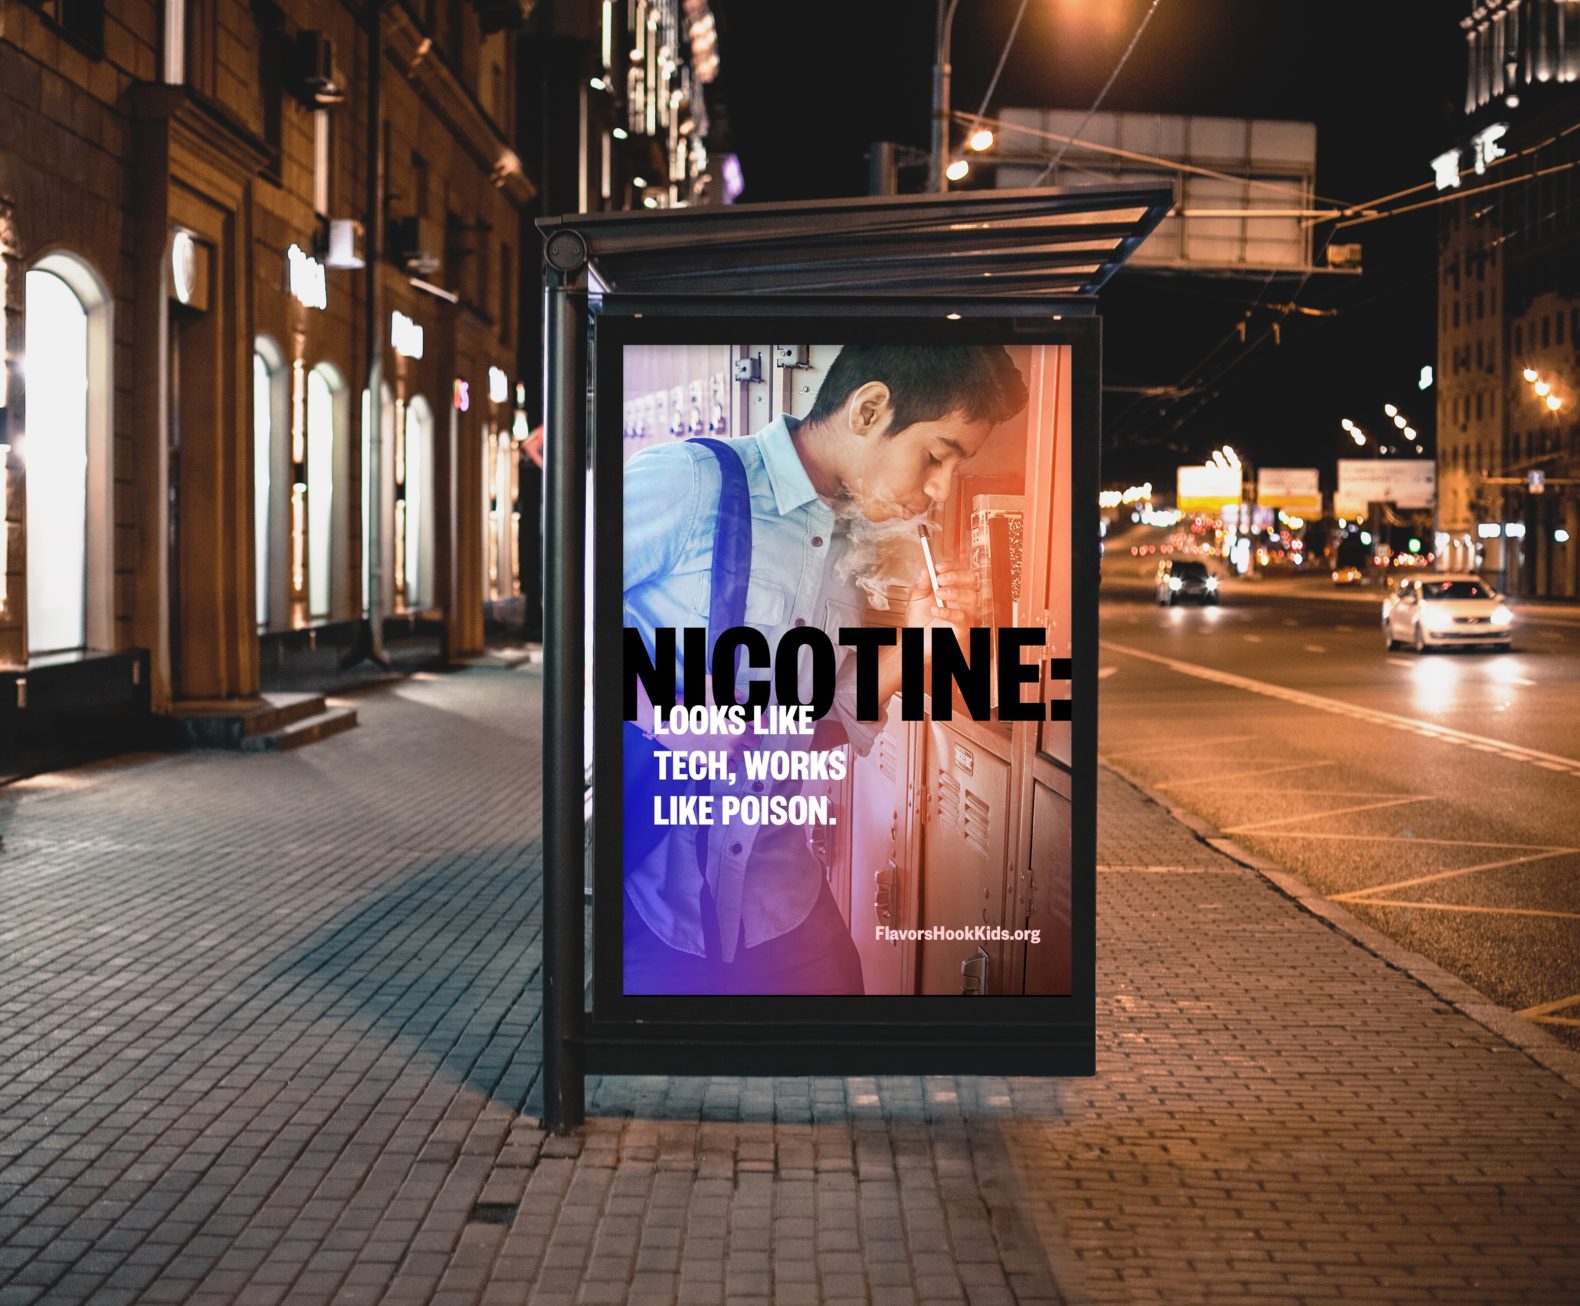 Bus stop billboard ad. Featuring male presenting teen leans into his locker at school and takes a drag of a vape pen. There is text over the image in black and white that reads “Nicotine: looks like tech, works like poison. “Flavorshookkids.org” is in the bottom right side of the image. 